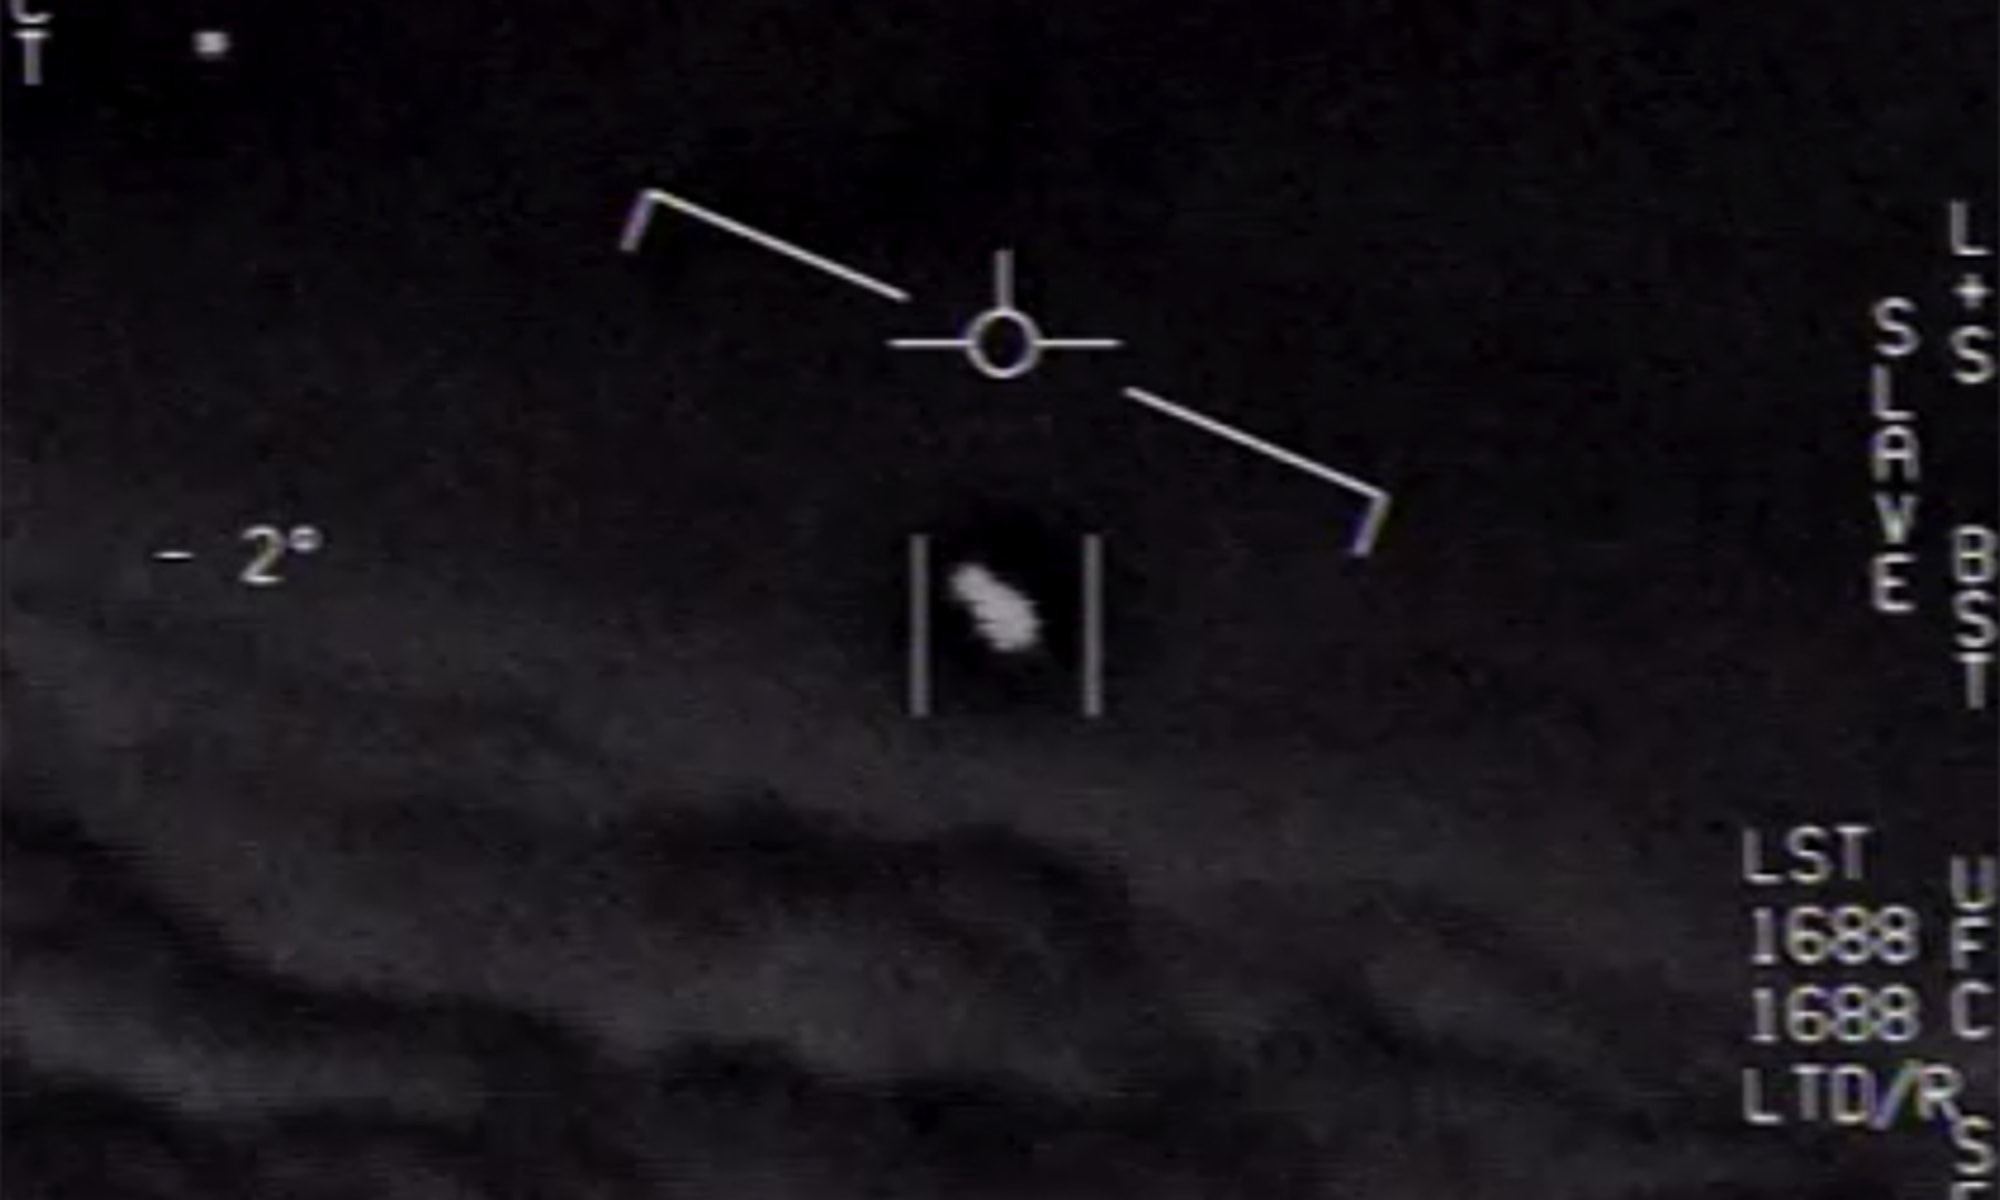 UFO image by the US Navy